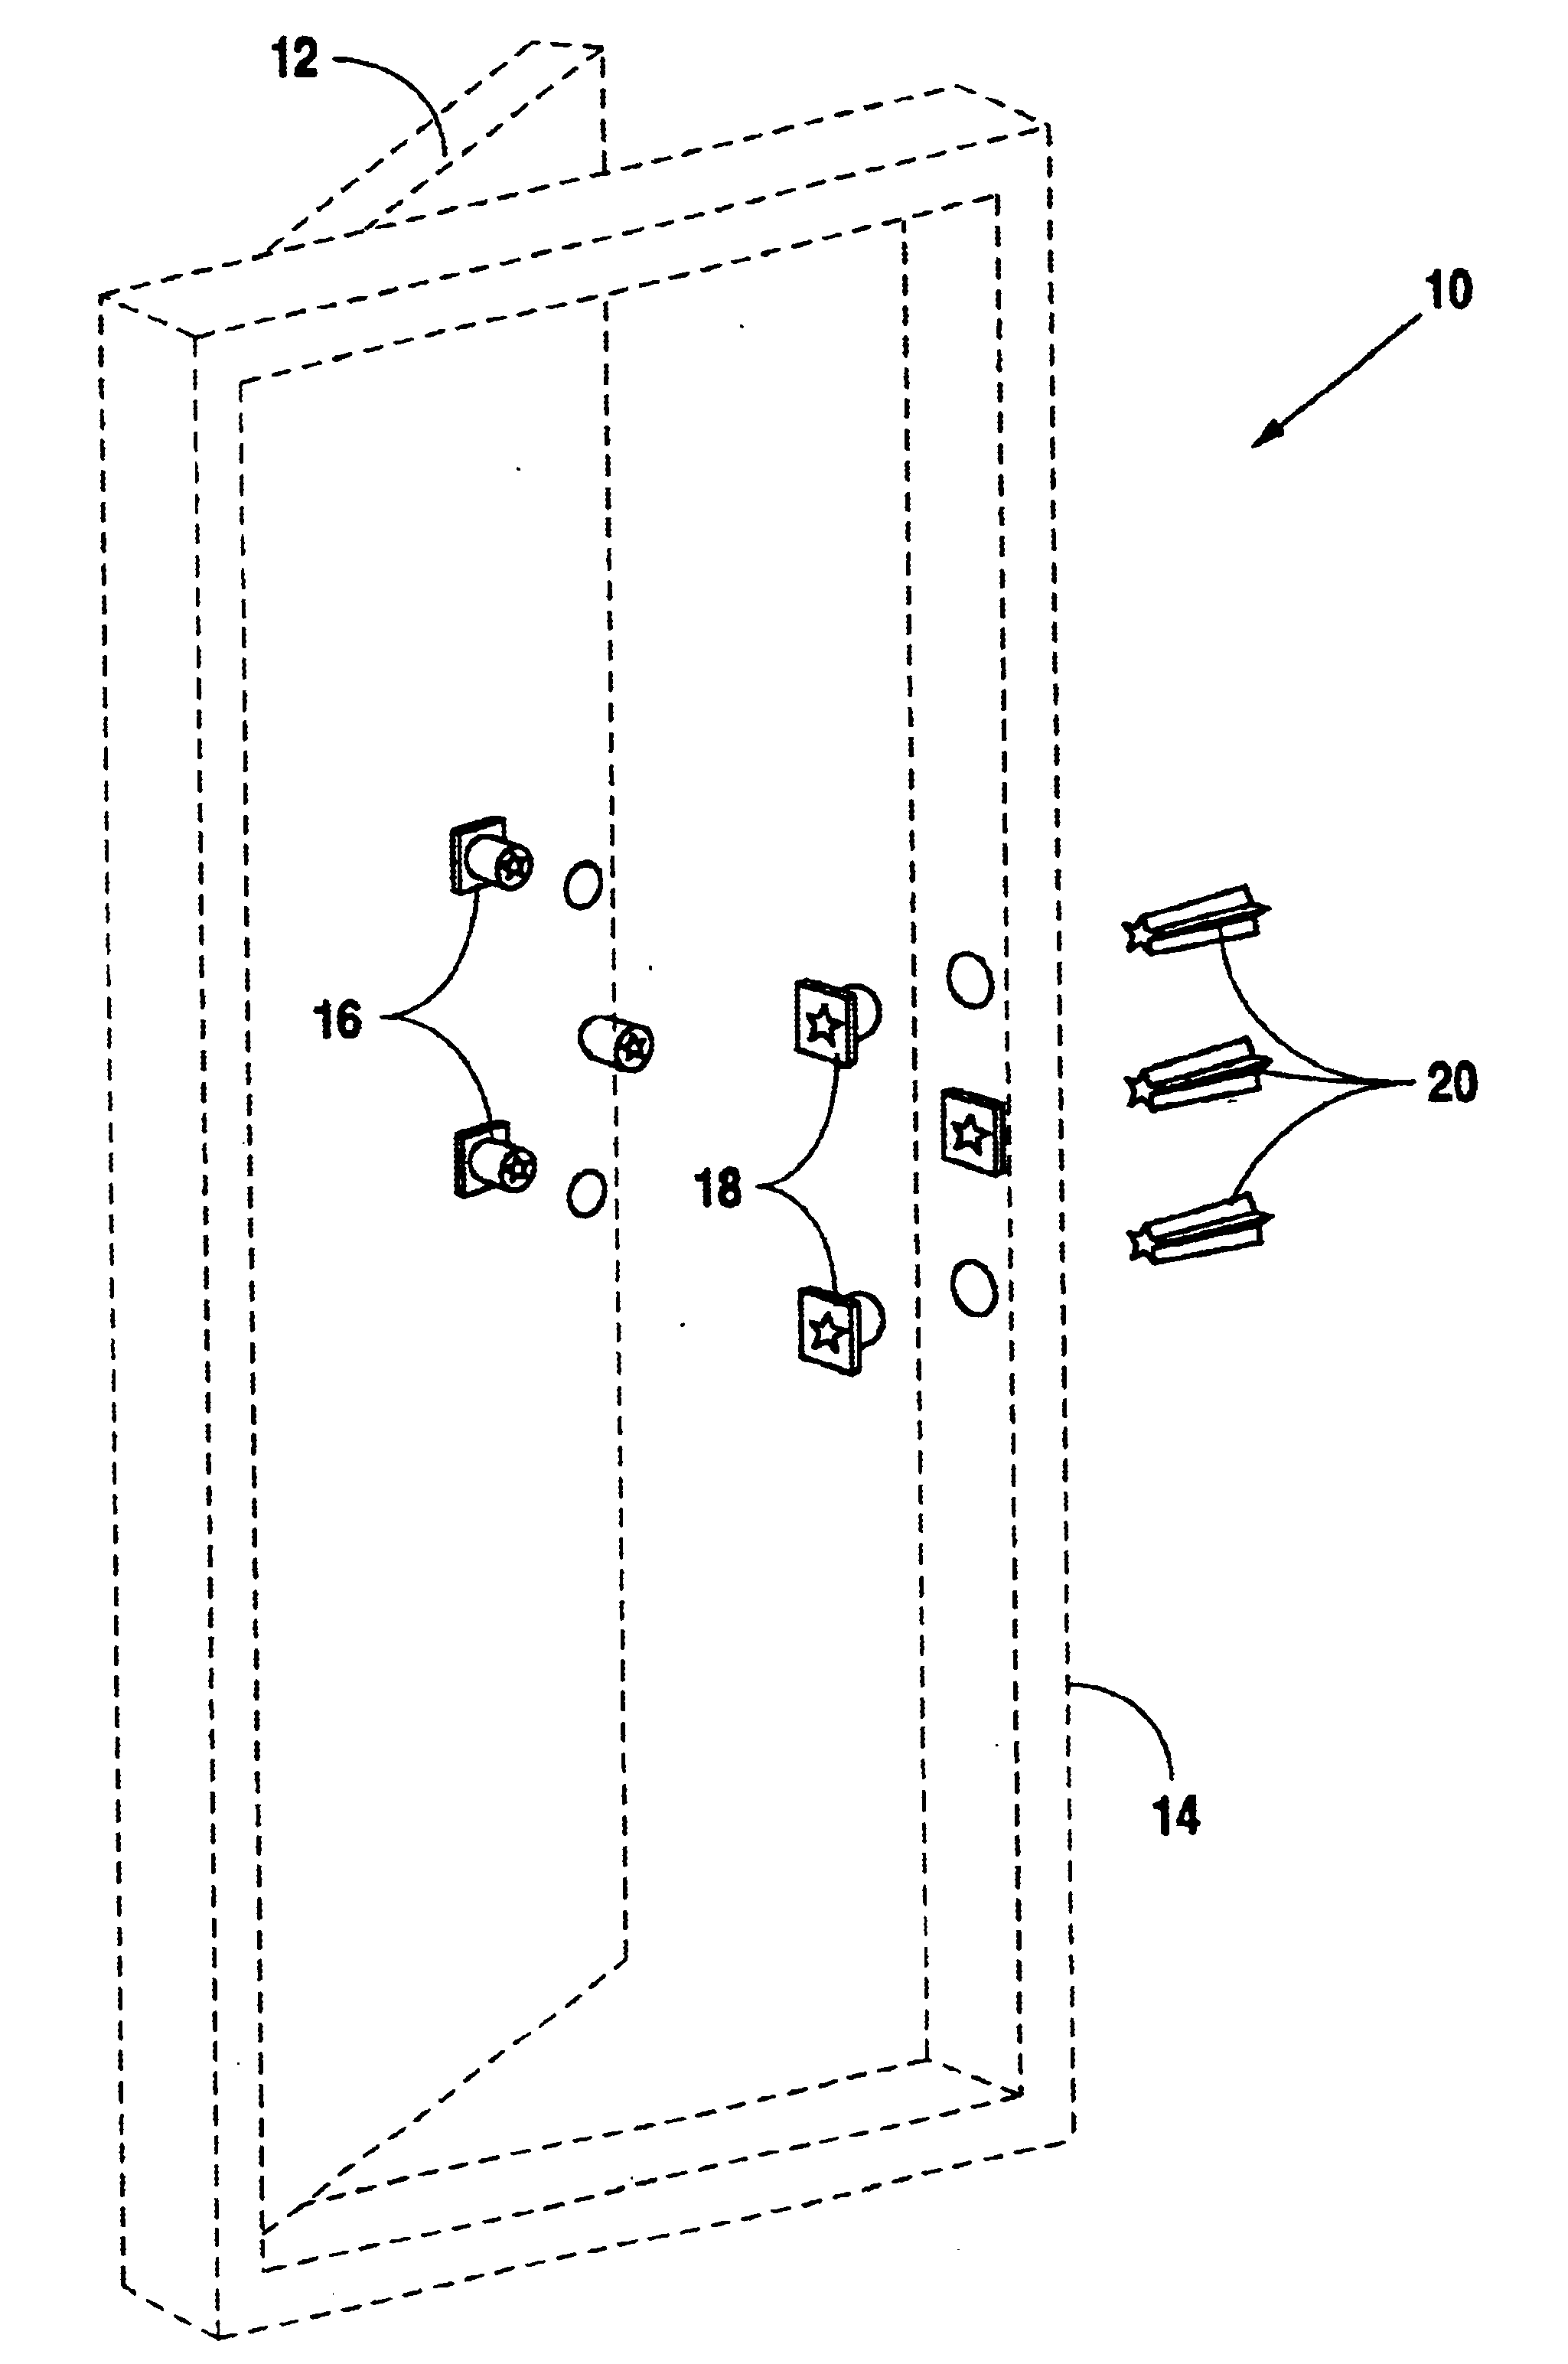 Door breach training system and method of use